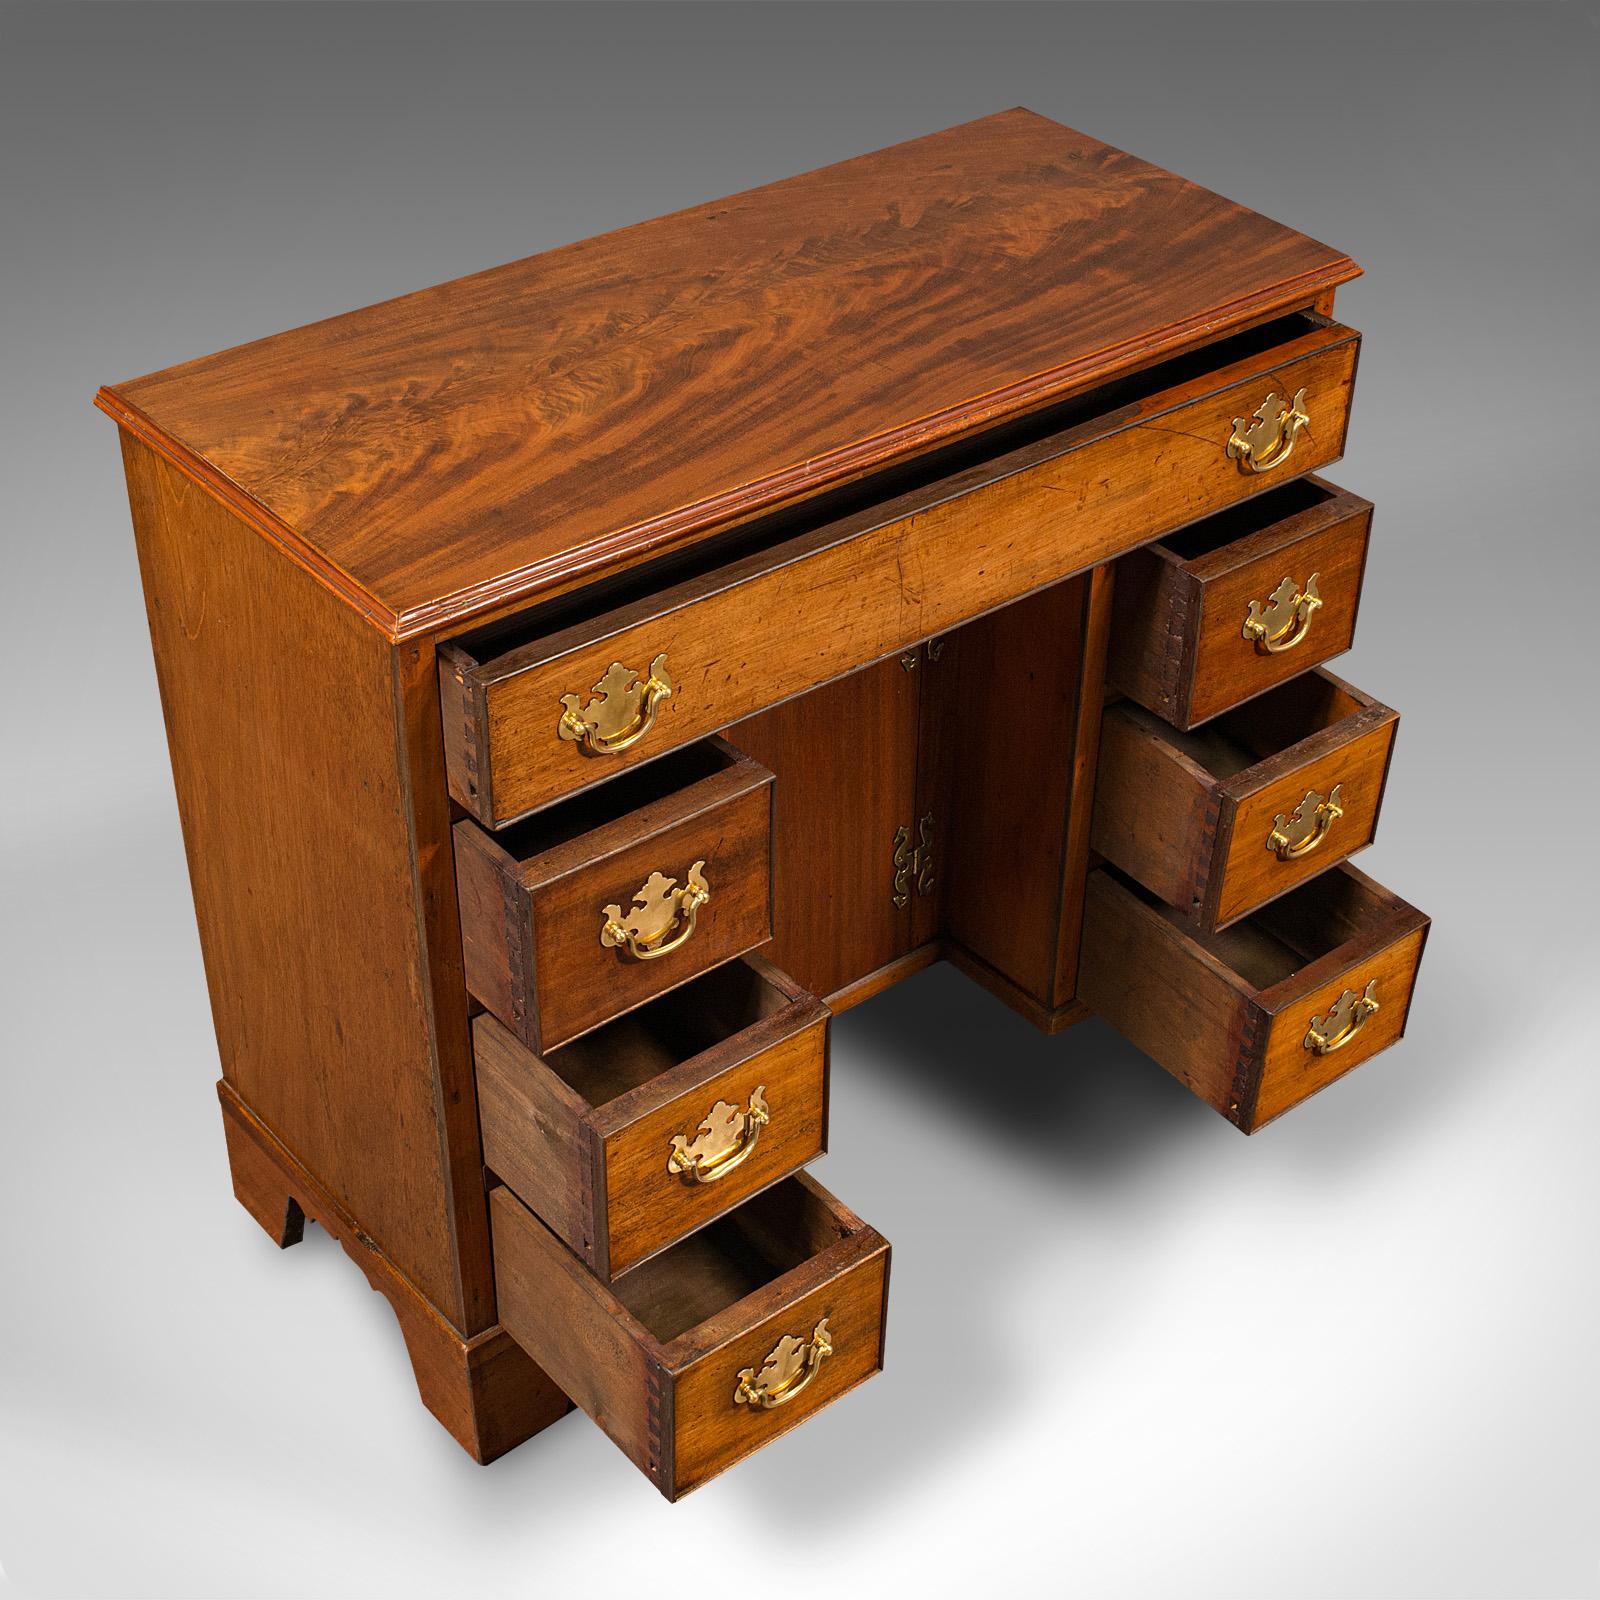 20th Century Small Antique Kneehole Desk, English, Writing Table, Georgian Revival, Edwardian For Sale